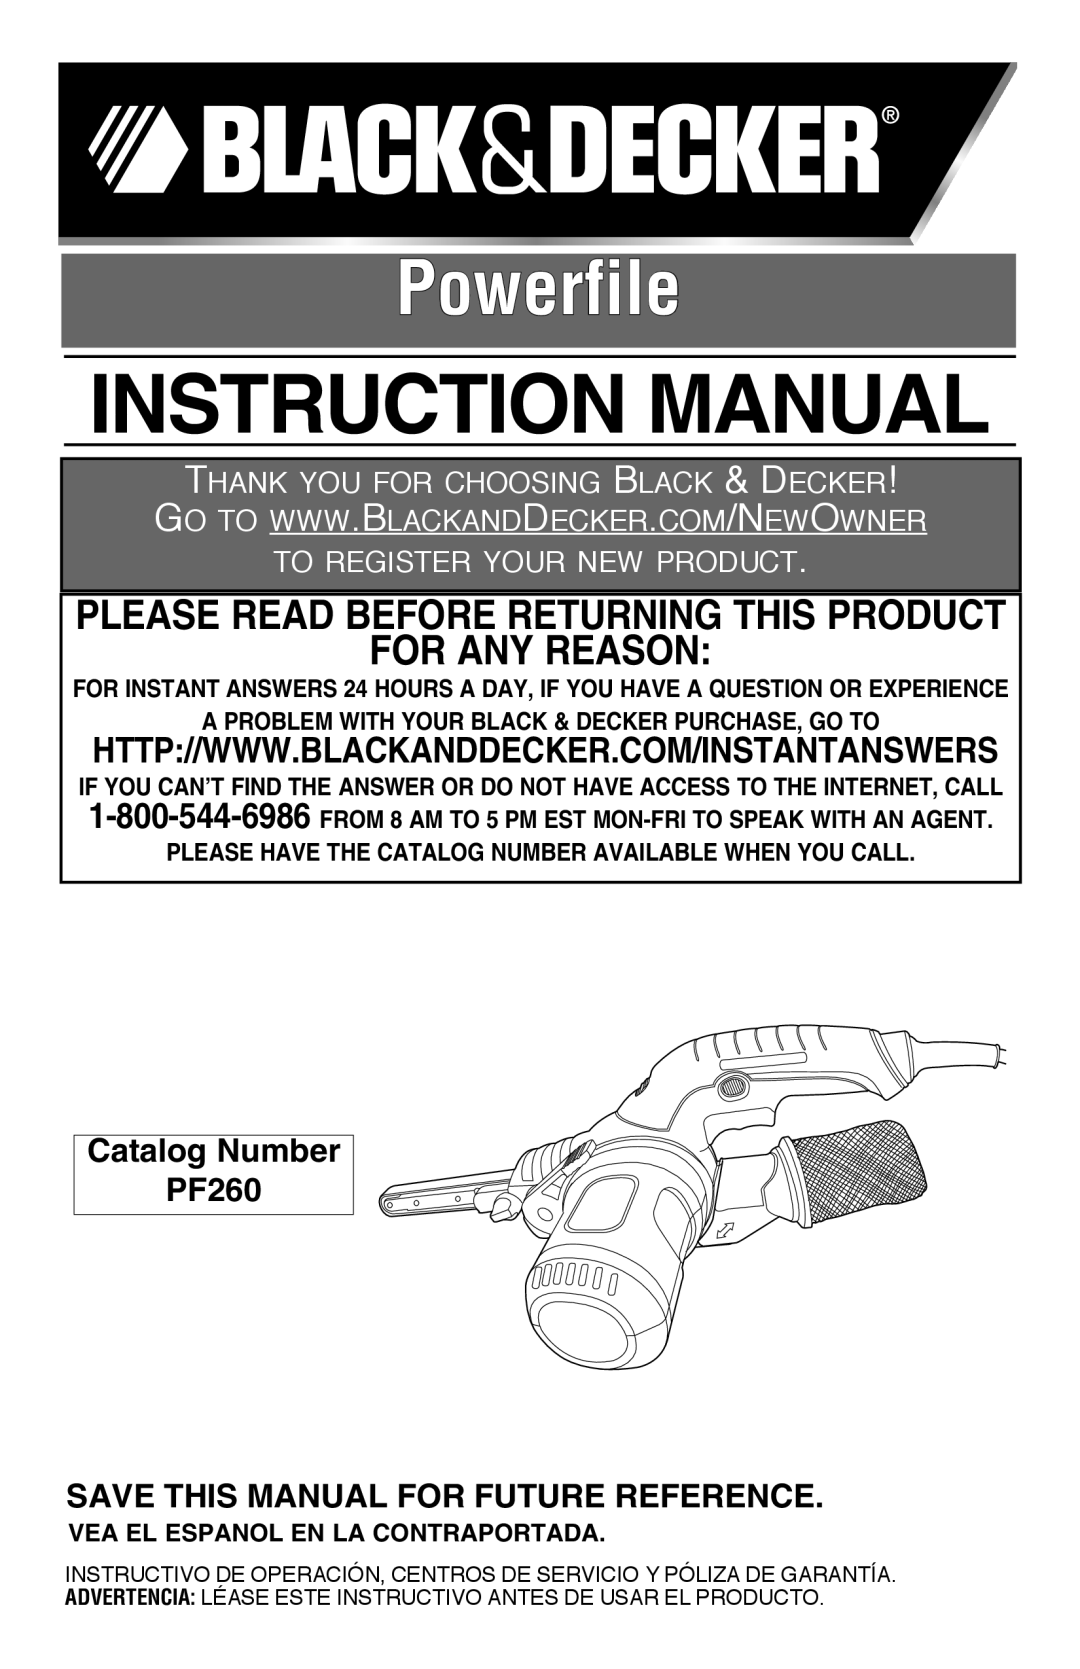 Black & Decker instruction manual Instruction Manual, Catalog Number PF260 Save this manual for Future reference 